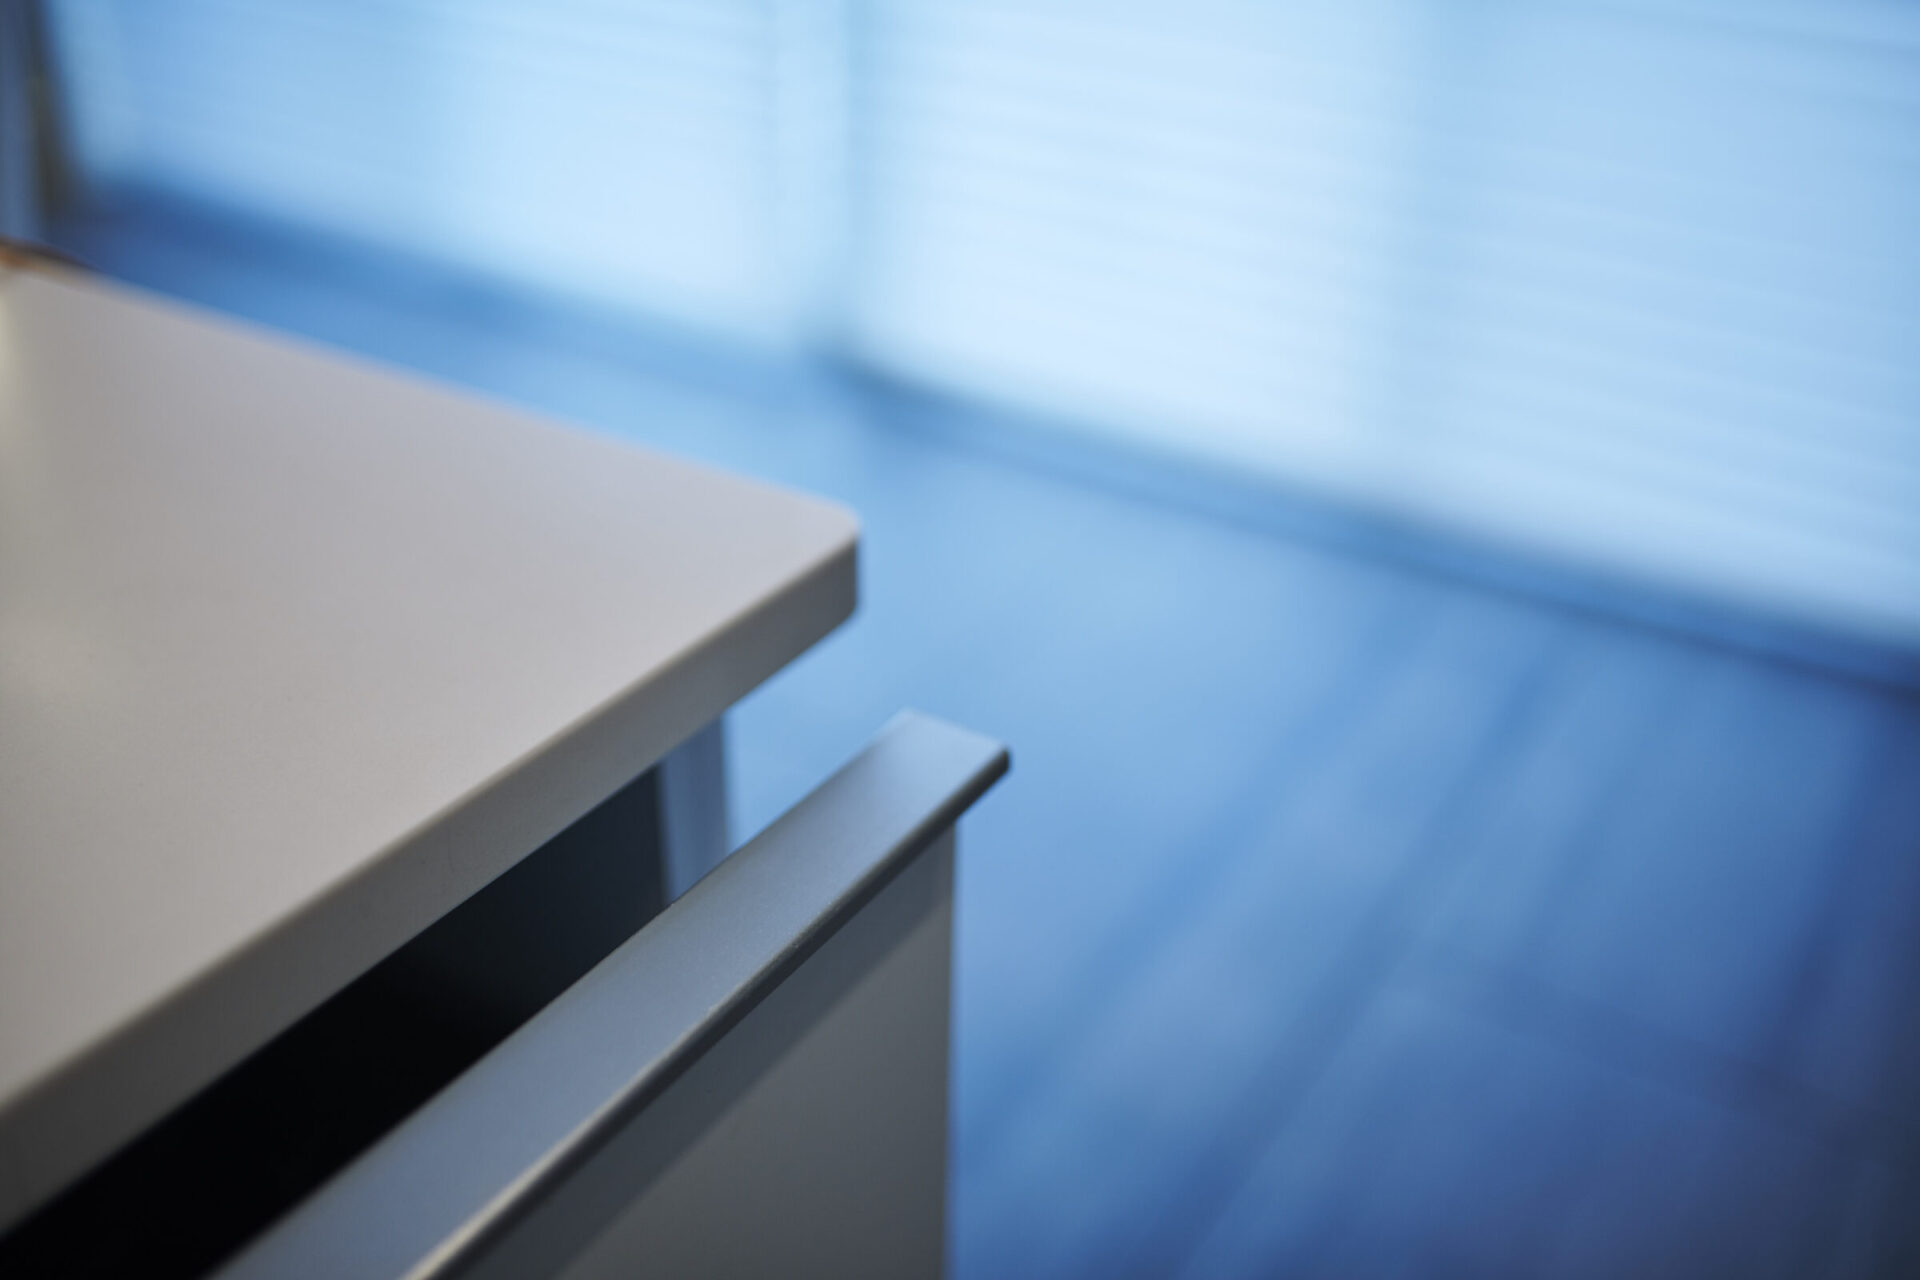 A close-up, blurred photo of an opened drawer in a minimalistic setting with a white counter and blue-tinted background, likely indicating a modern interior design.